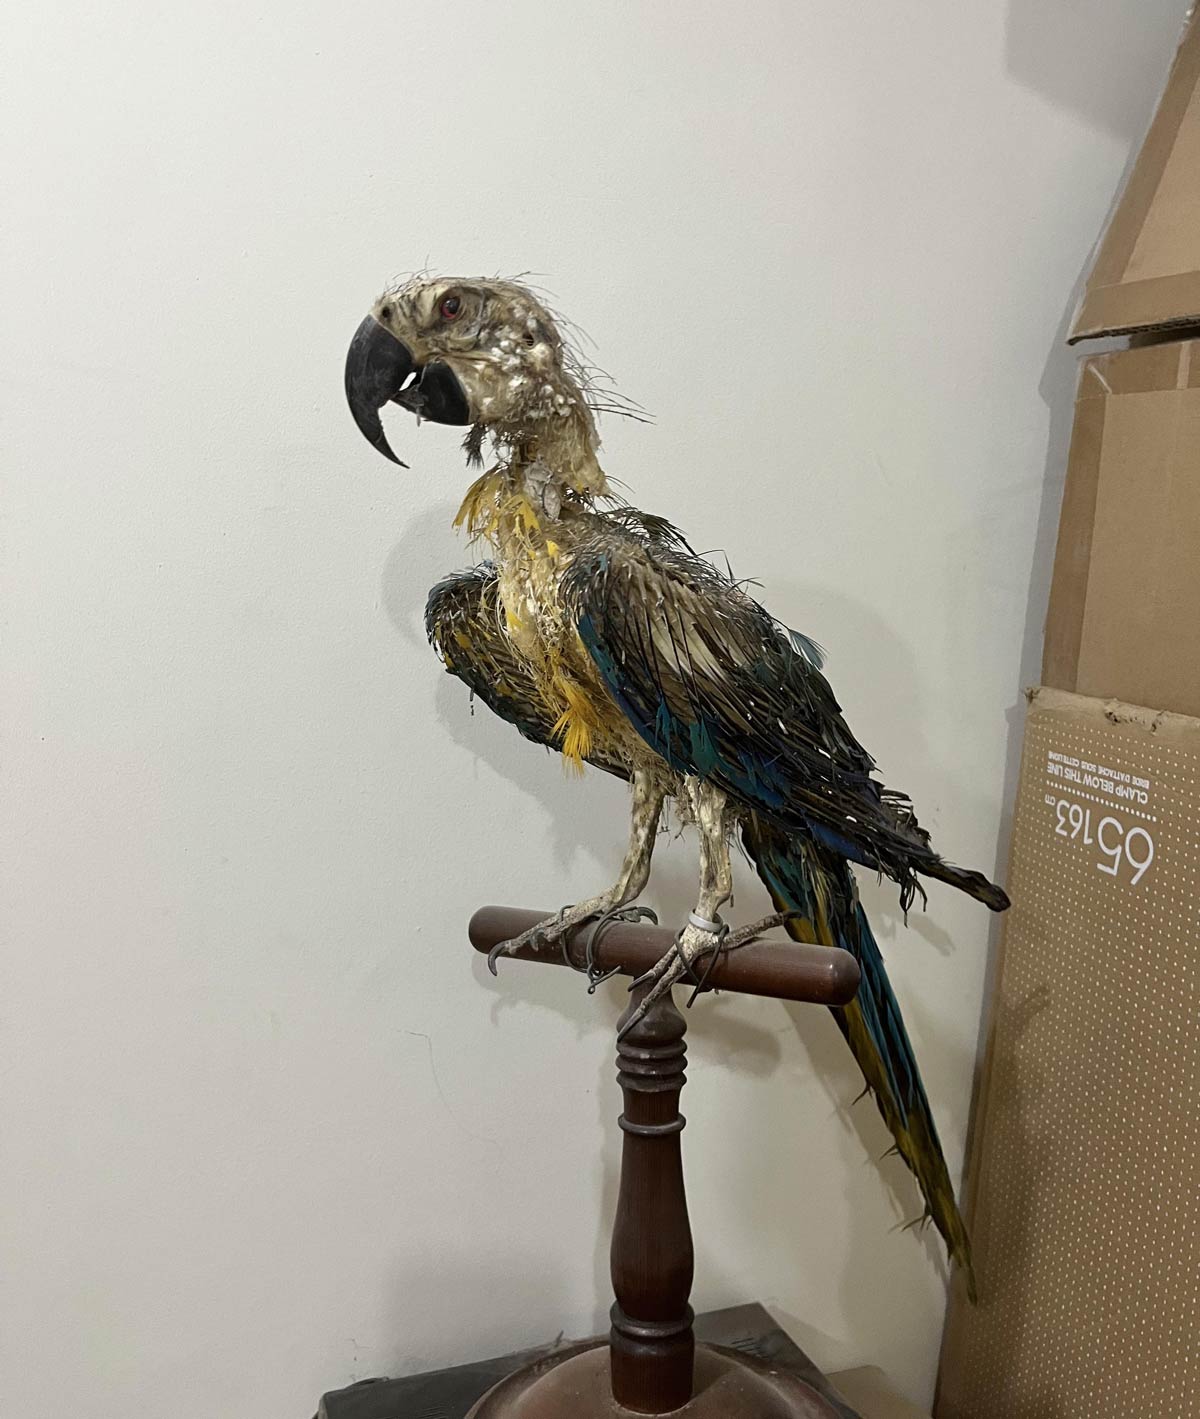 My grandfather sent his bird to a taxidermist. The results are macawbre